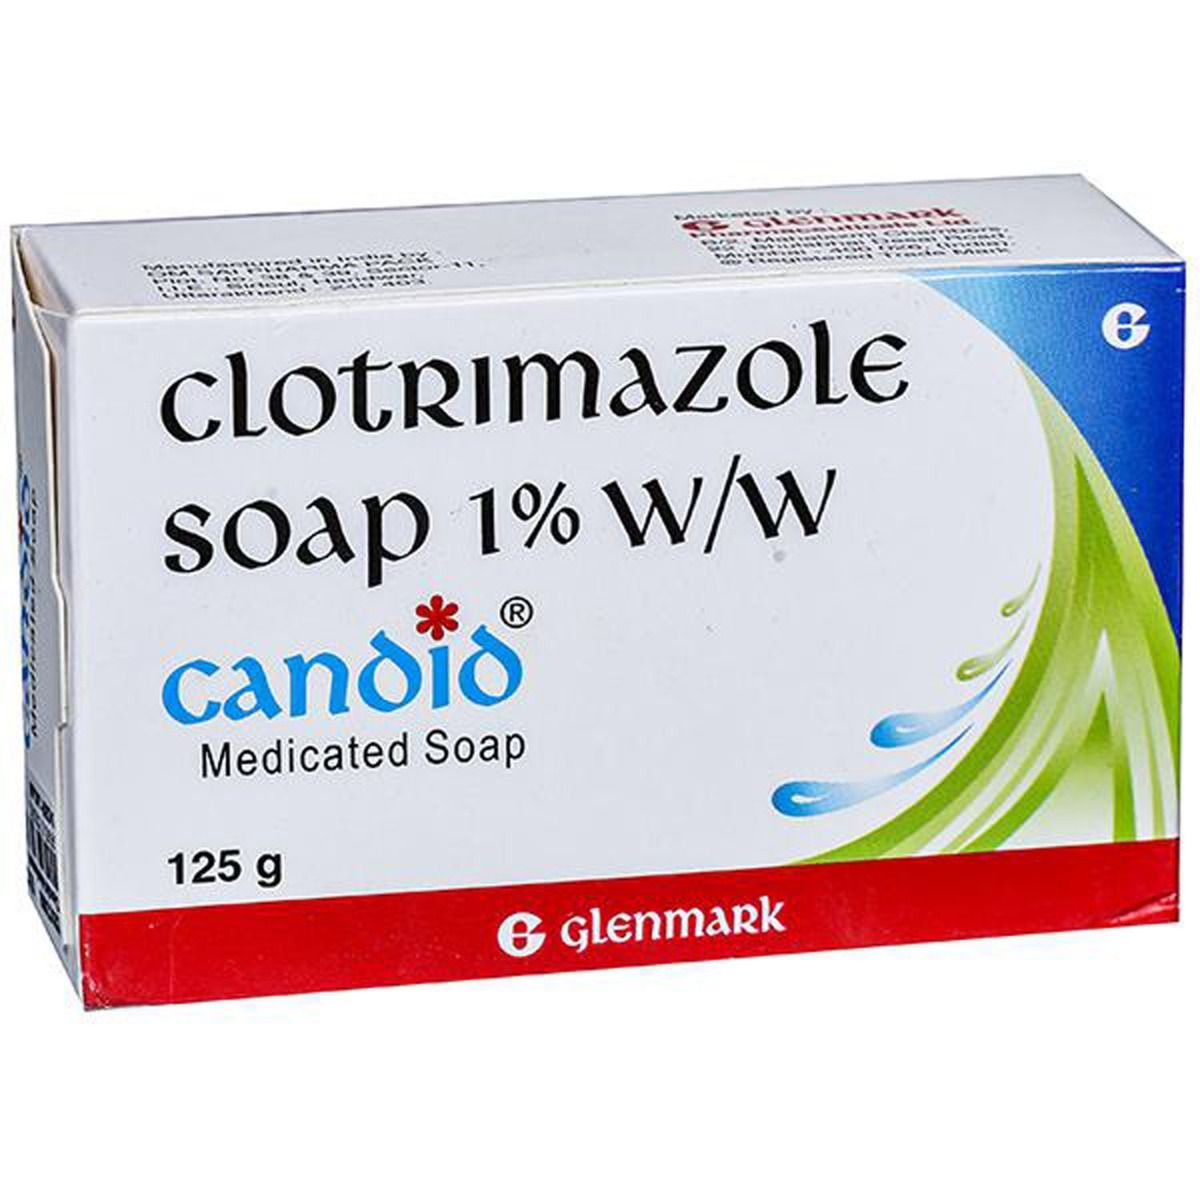 Candid Medicated Soap 125 gm, Pack of 1 SOAP